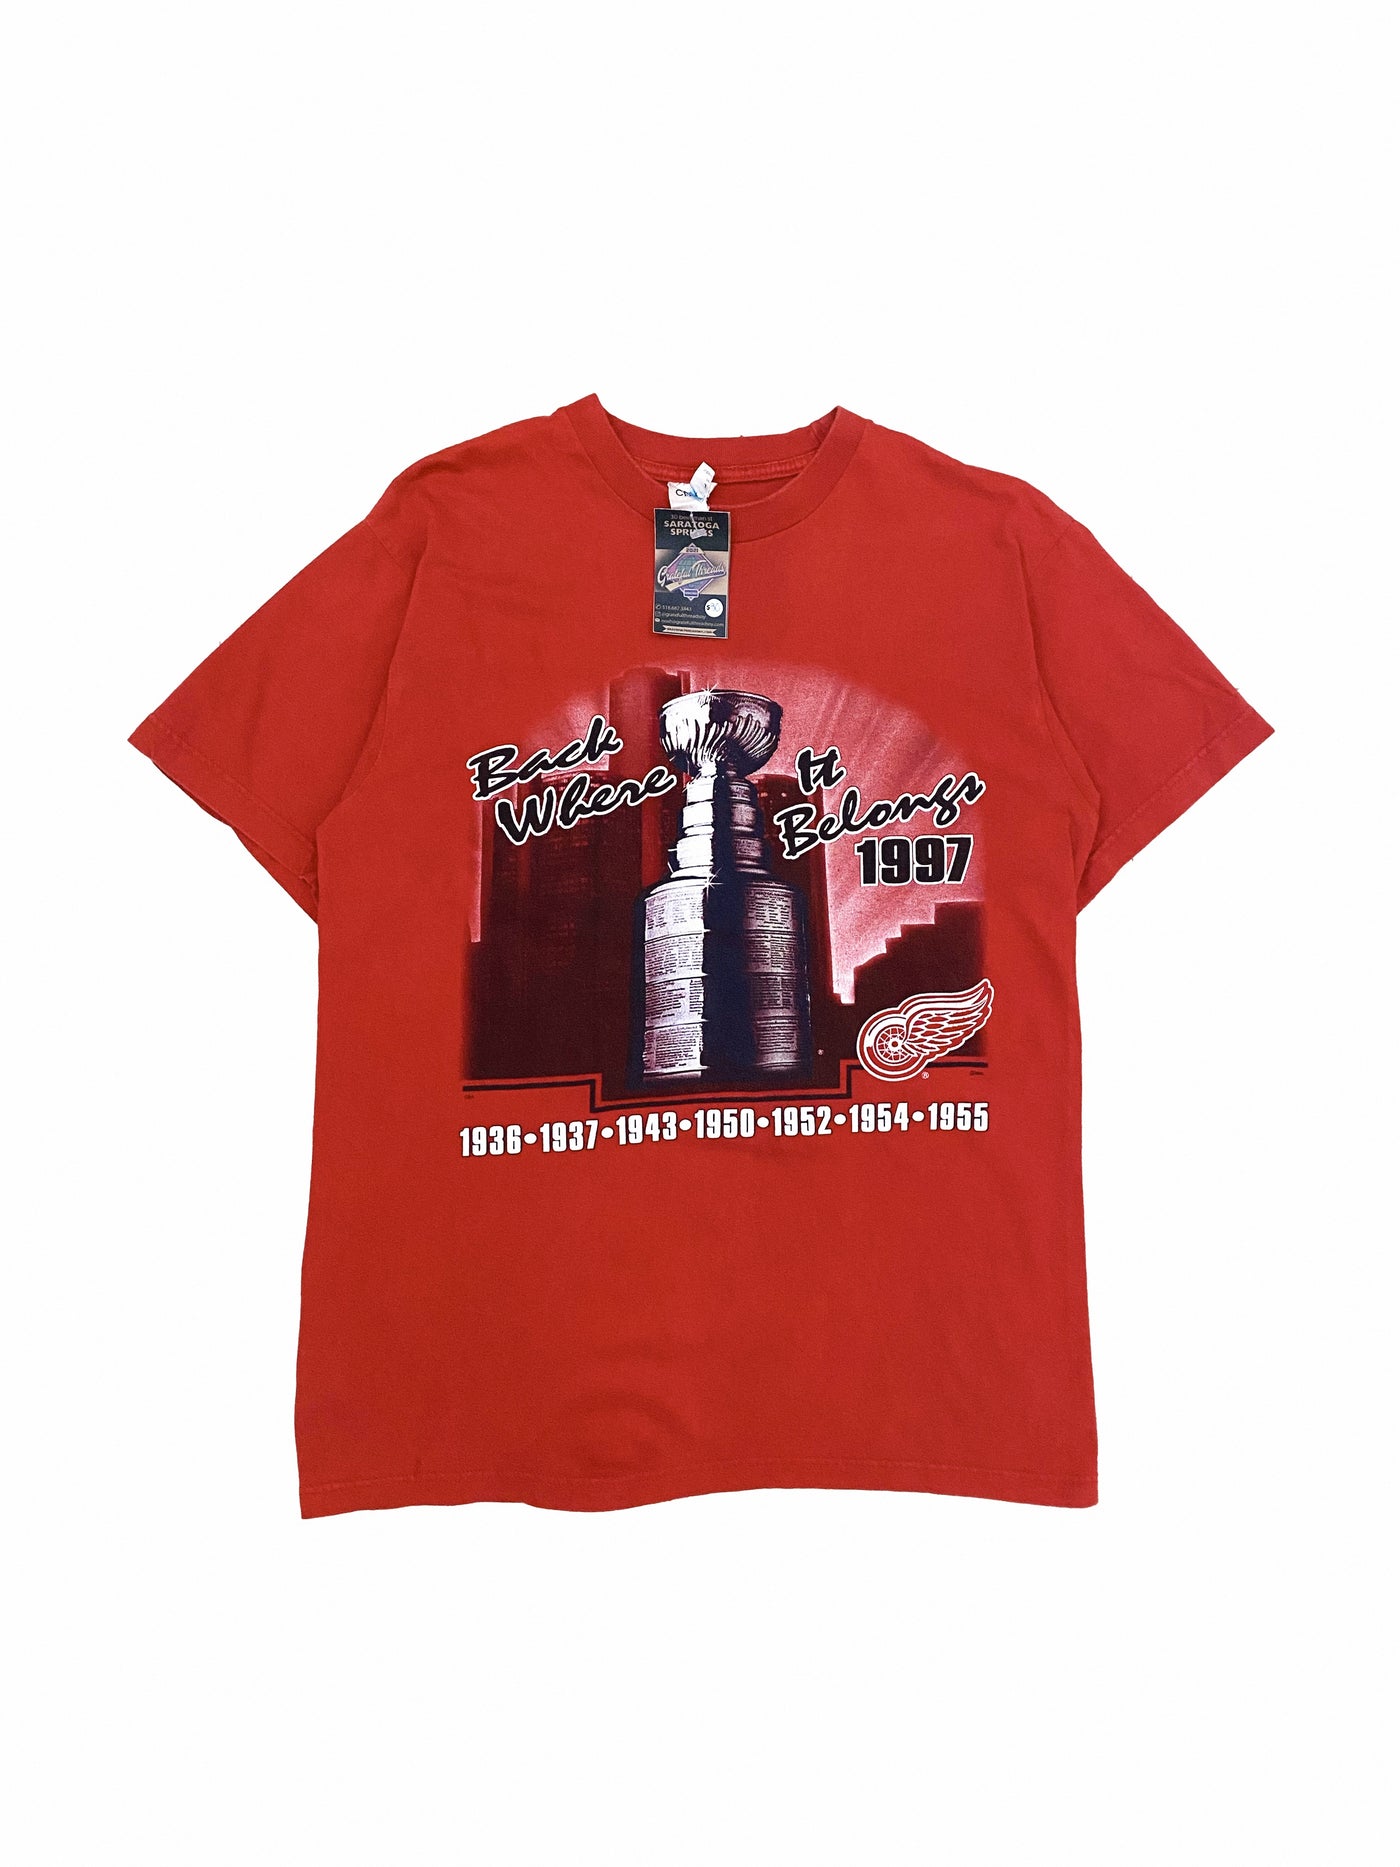 Vintage 1997 Detroit Red Wings Championship T-Shirt